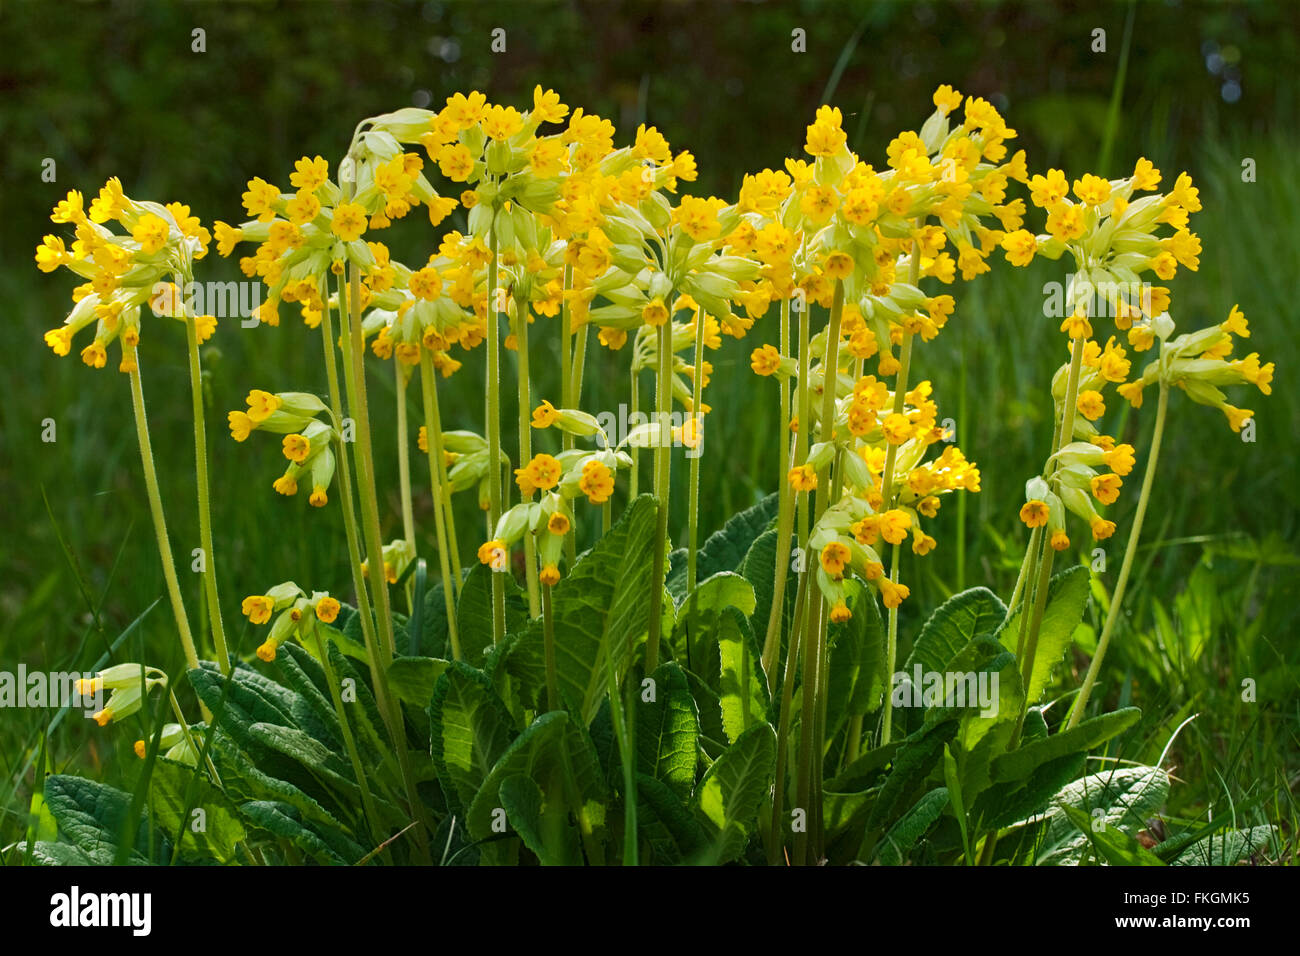 Cowslip (Primula veris) large group of yellow plants with green hairy leaves at base. Taken in landscape format. Stock Photo